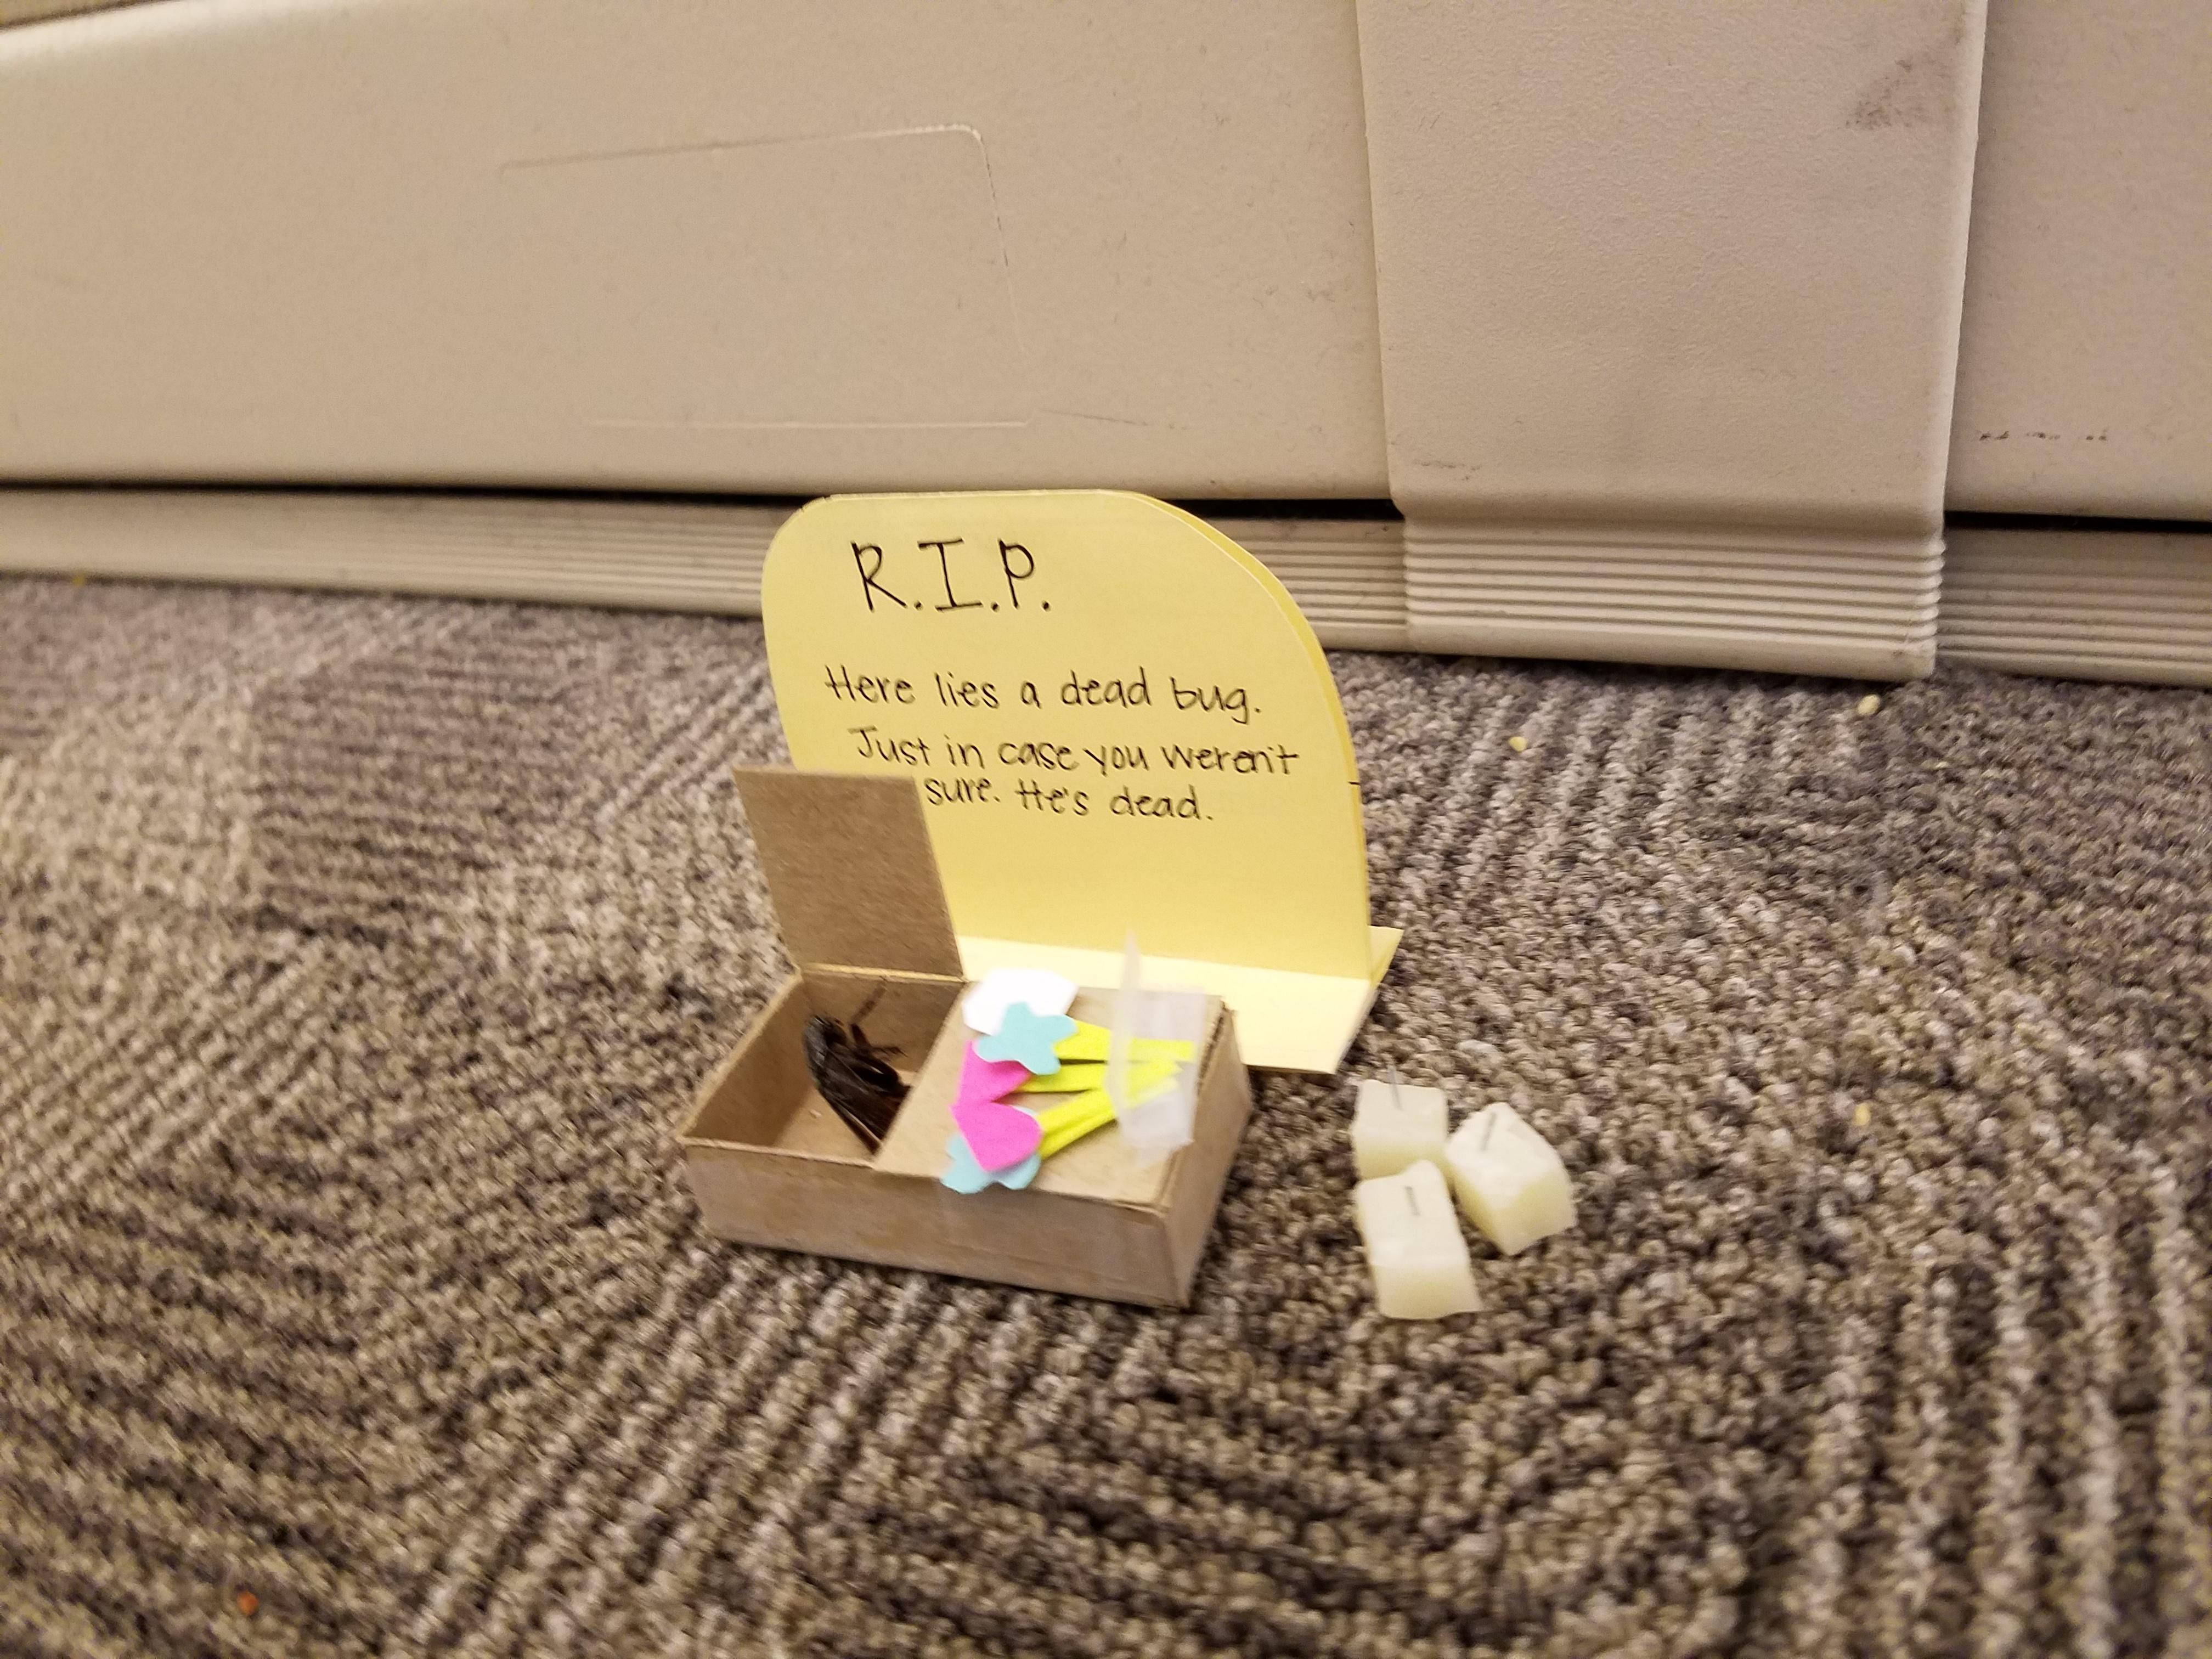 So my wife's coworker got tired of seeing this dead bug on the floor at work...